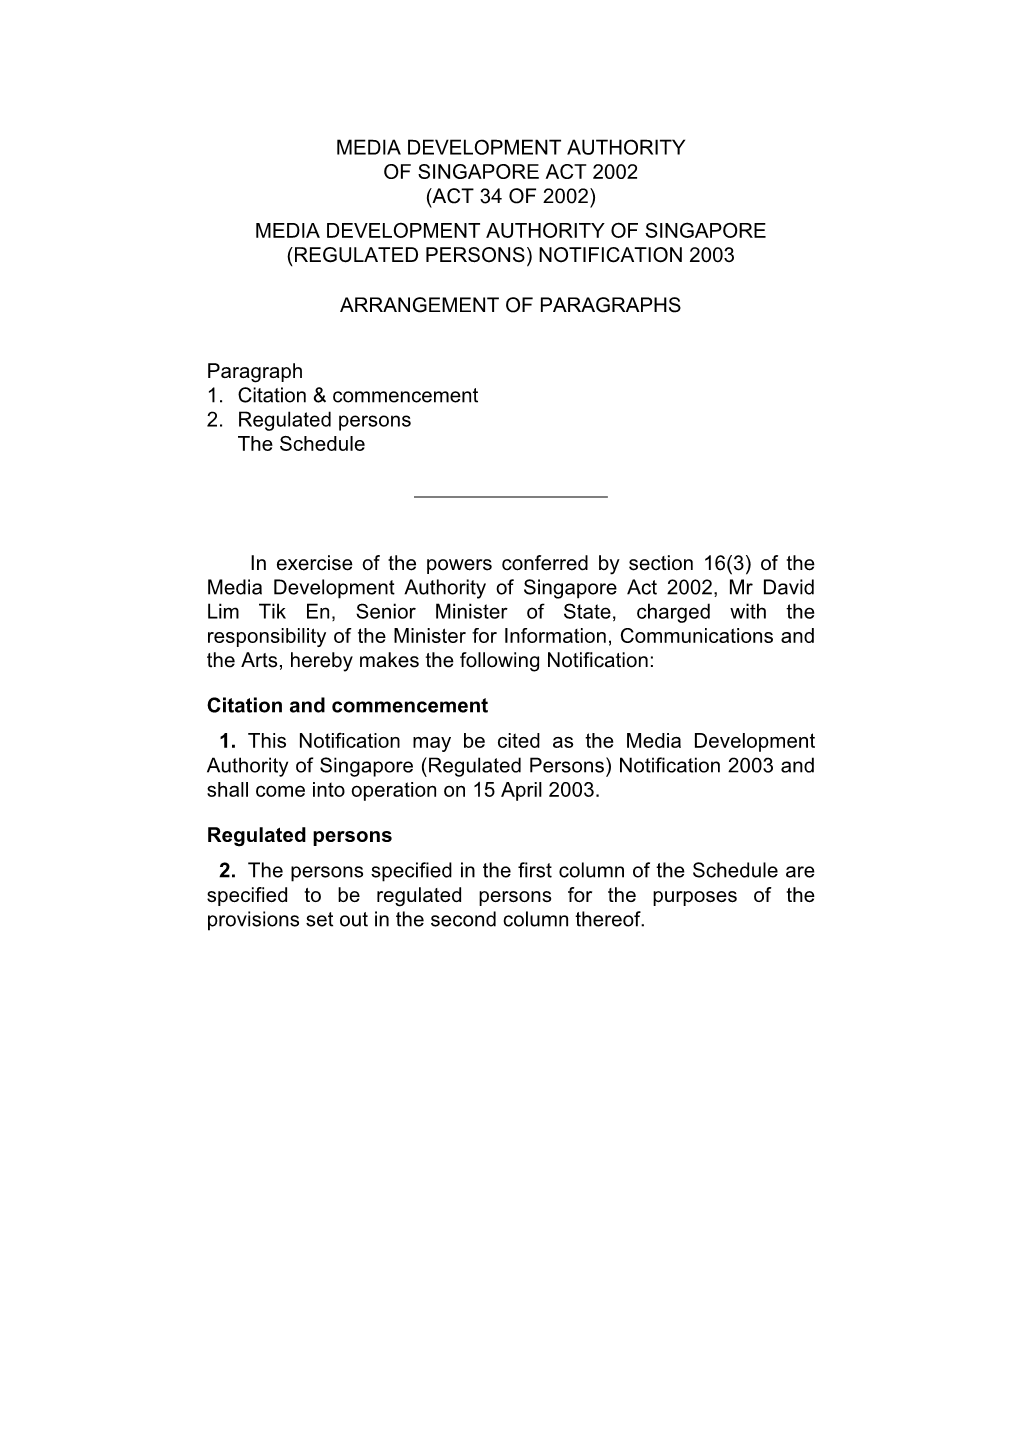 Media Development Authority of Singapore Act 2002 (Act 34 of 2002) Media Development Authority of Singapore (Regulated Persons) Notification 2003